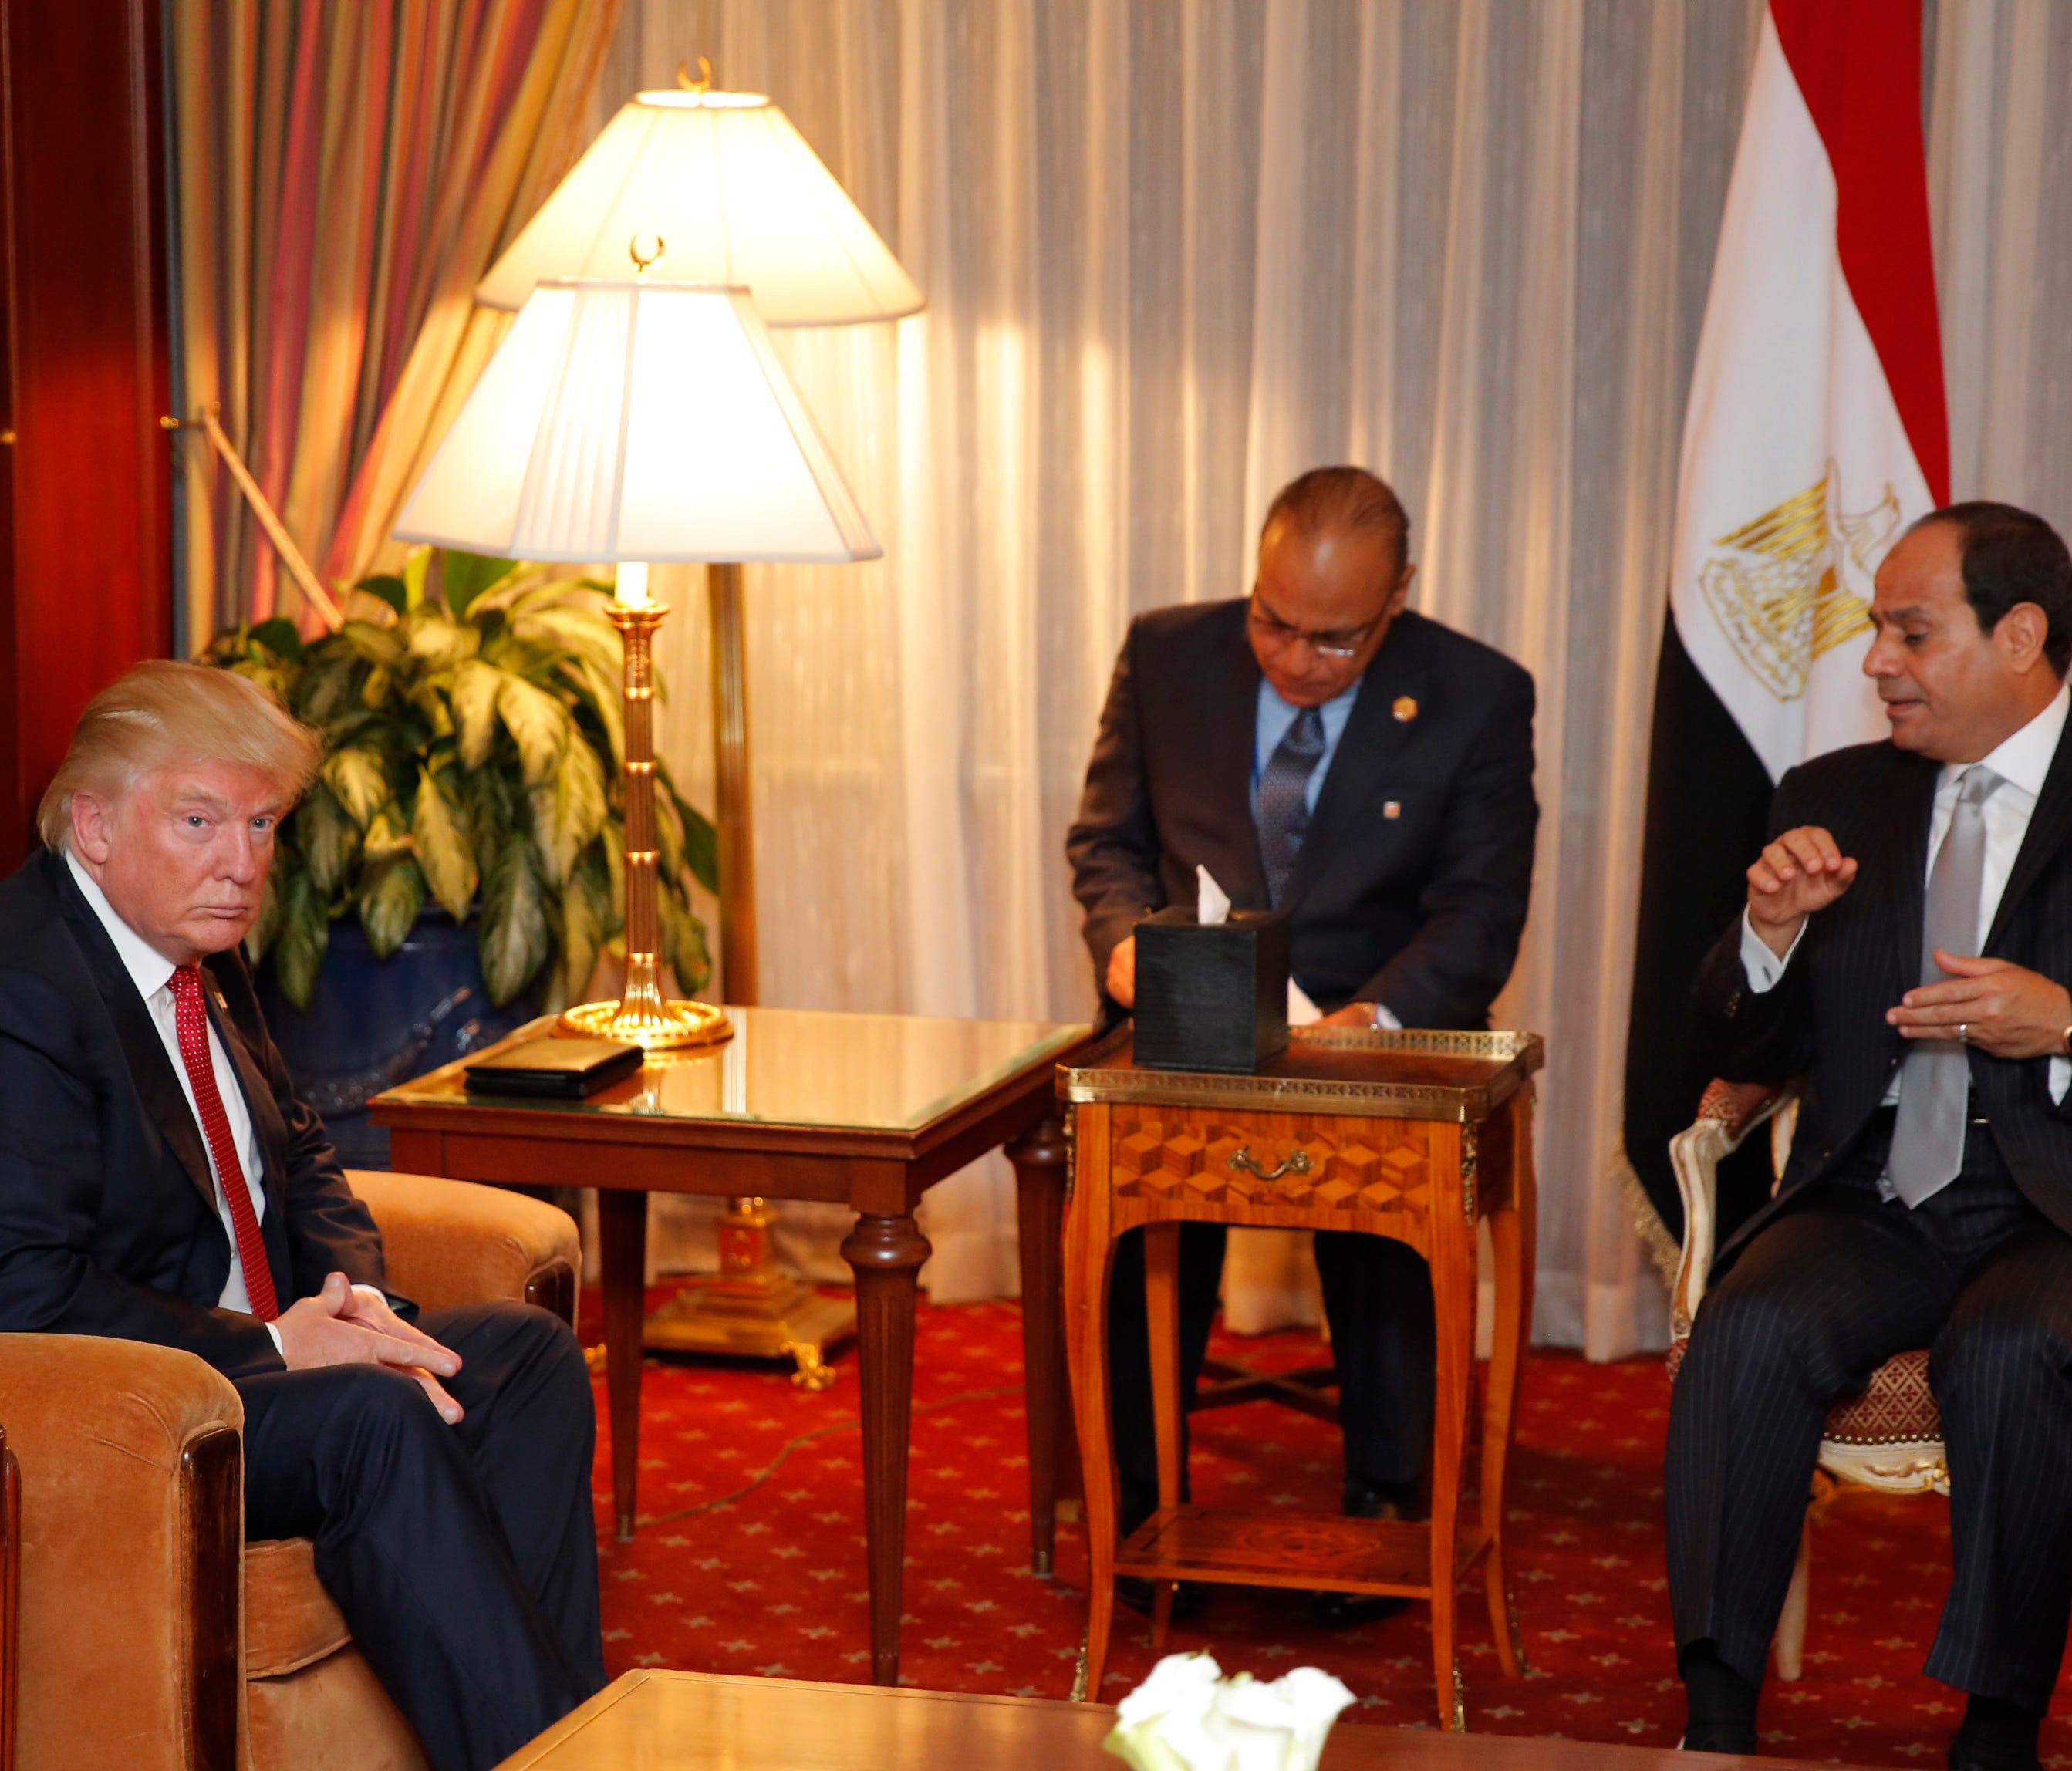 Then-Republican presidential candidate Donald Trump looking on as Egyptian President Abdel Fattah el-Sisi speaks during a September meeting at the Plaza Hotel in New York.